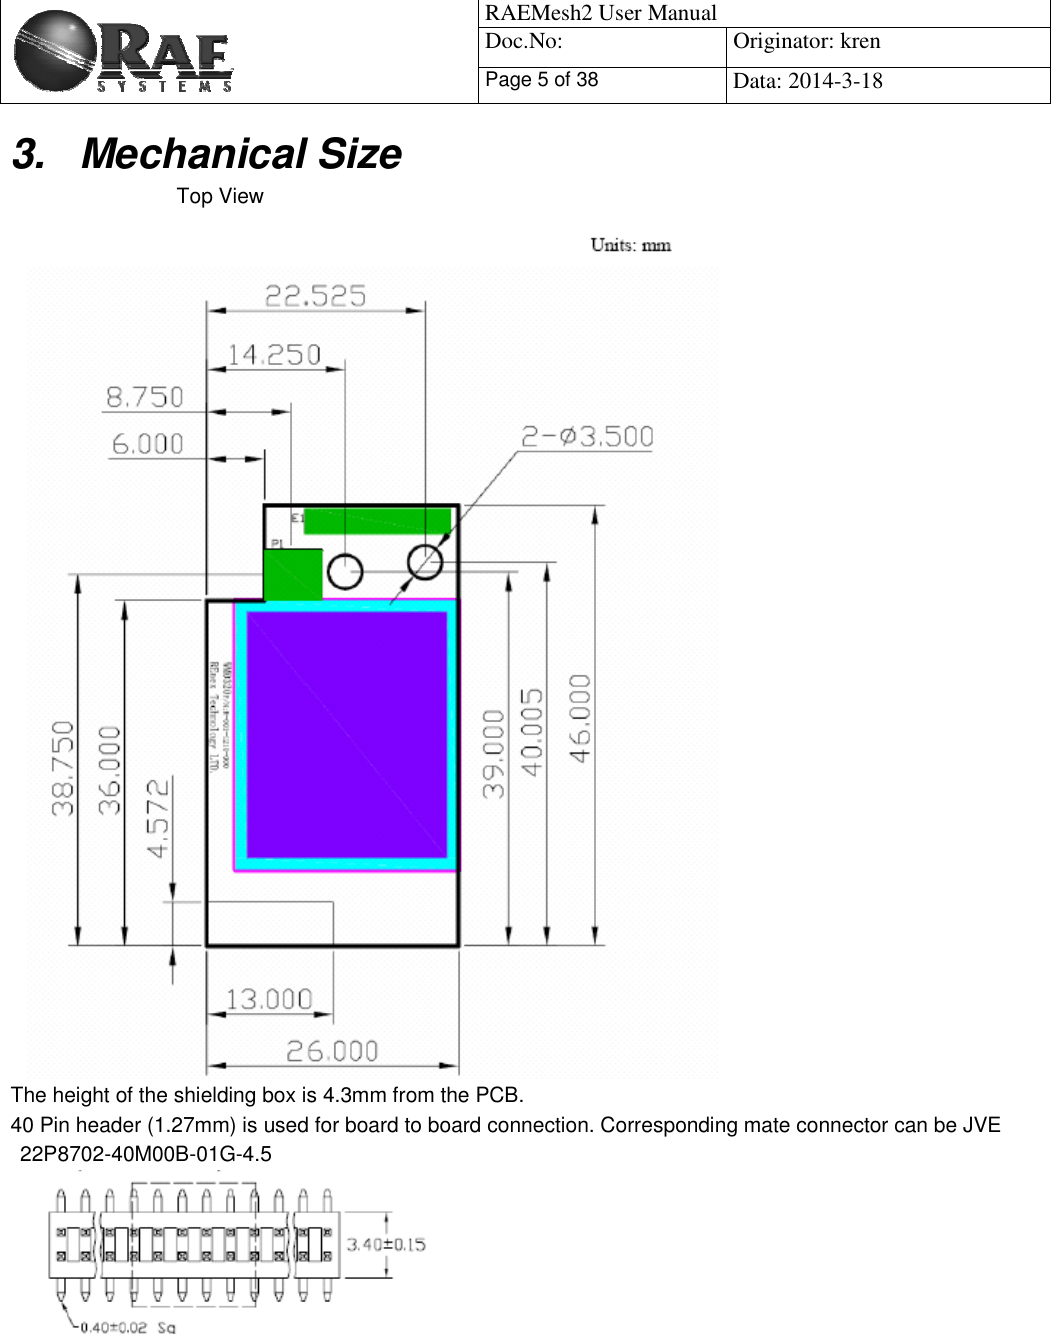                                            RAEMesh2 User Manual Doc.No: Originator: kren Page 5 of 38Data: 2014-3-18 3. Mechanical Size       Top View The height of the shielding box is 4.3mm from the PCB. 40 Pin header (1.27mm) is used for board to board connection. Corresponding mate connector can be JVE 22P8702-40M00B-01G-4.5 